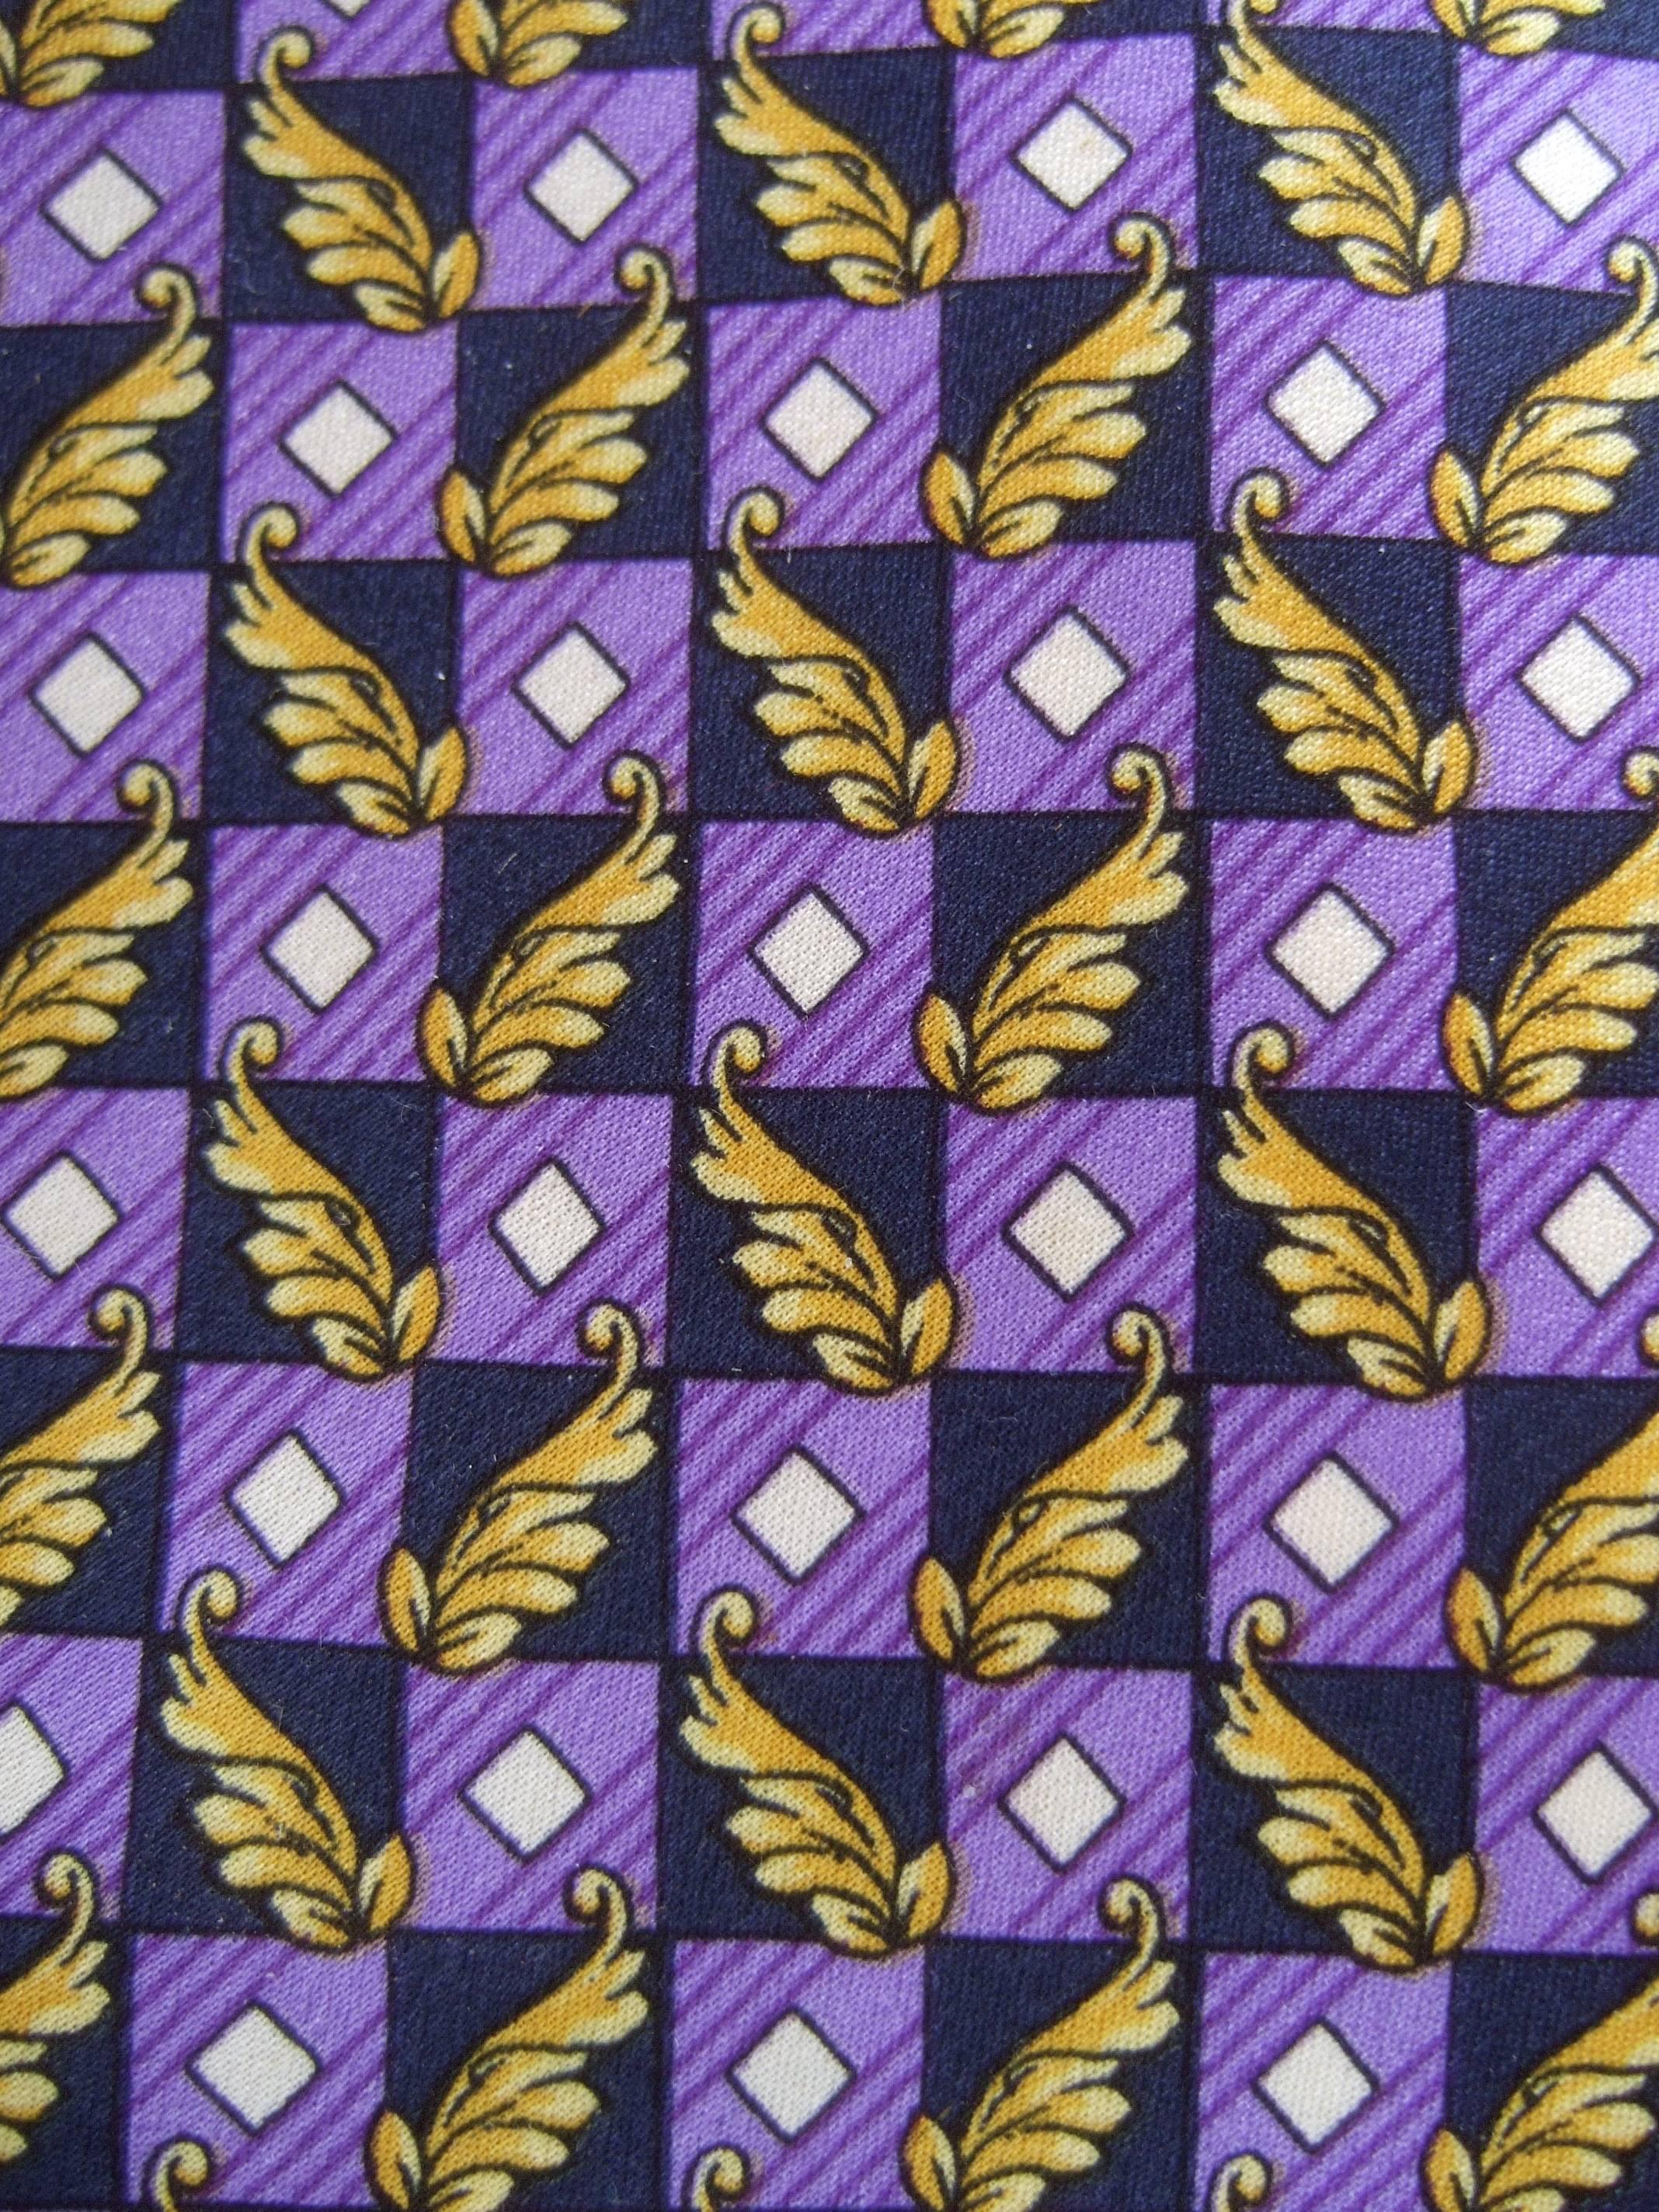 Versace Italian violet and gold graphic print silk necktie c 1990s
The stylish designer necktie is illustrated with violet color
block graphics juxtaposed with golden leaf foliage 

The geometric box design is contiguous on the front
Transitions